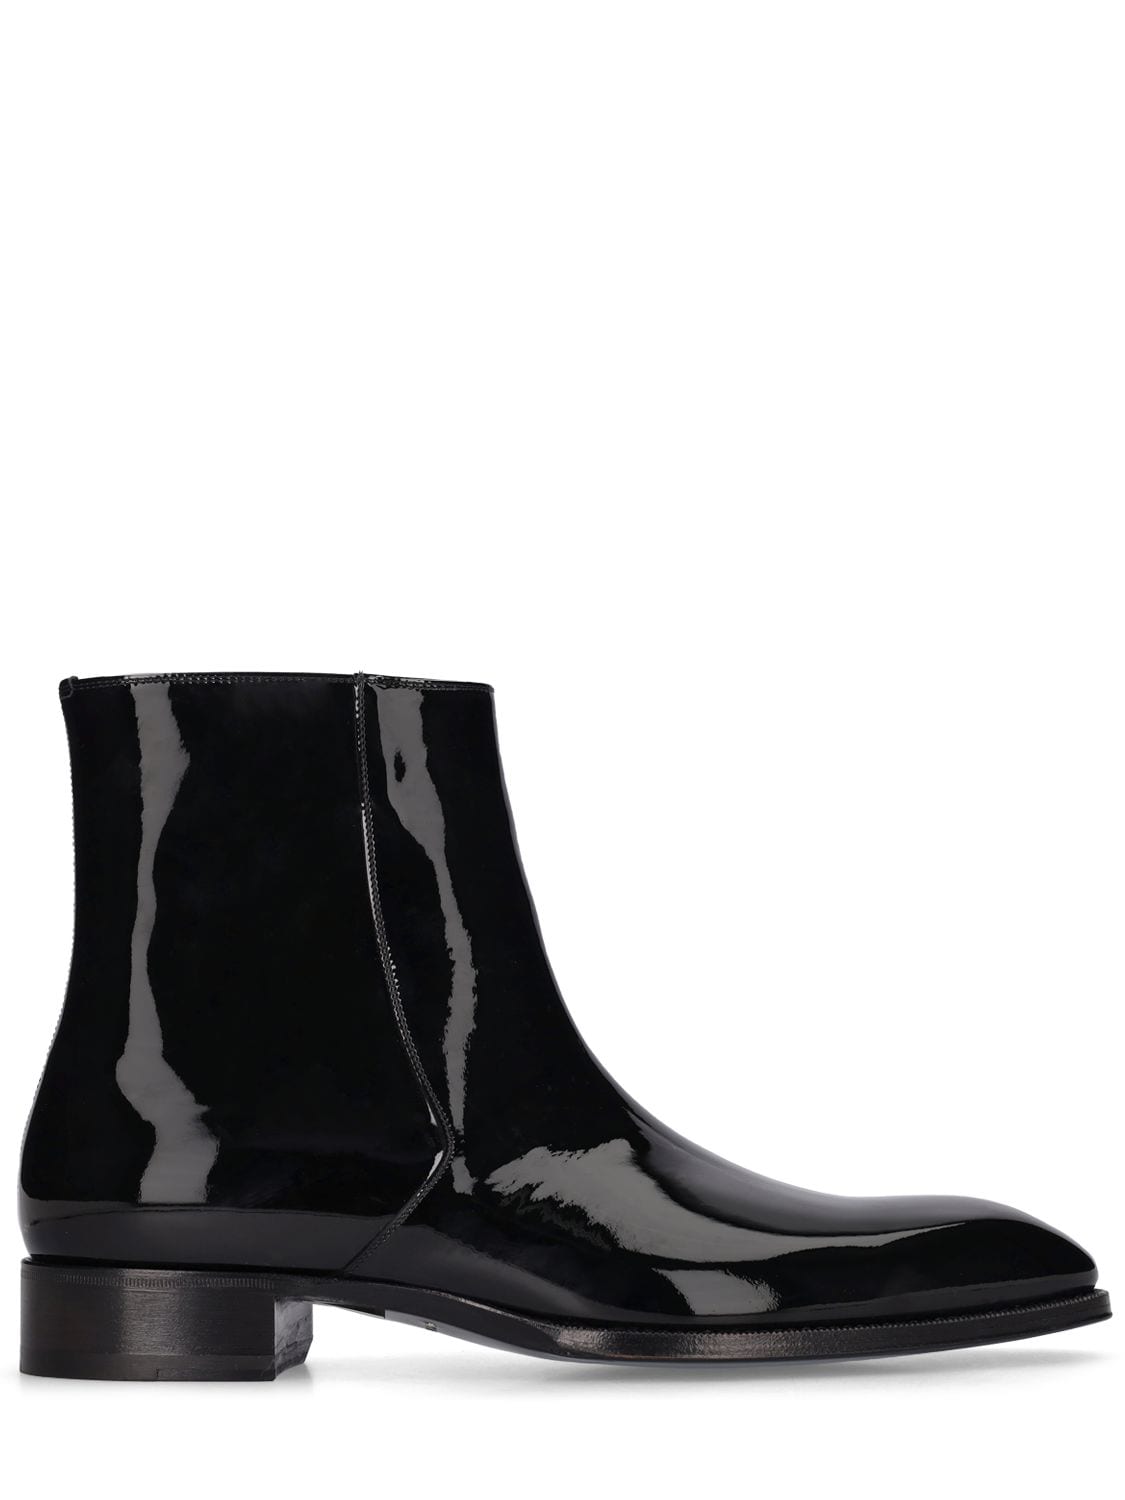 Image of Lvr Exclusive Formal Ankle Boots